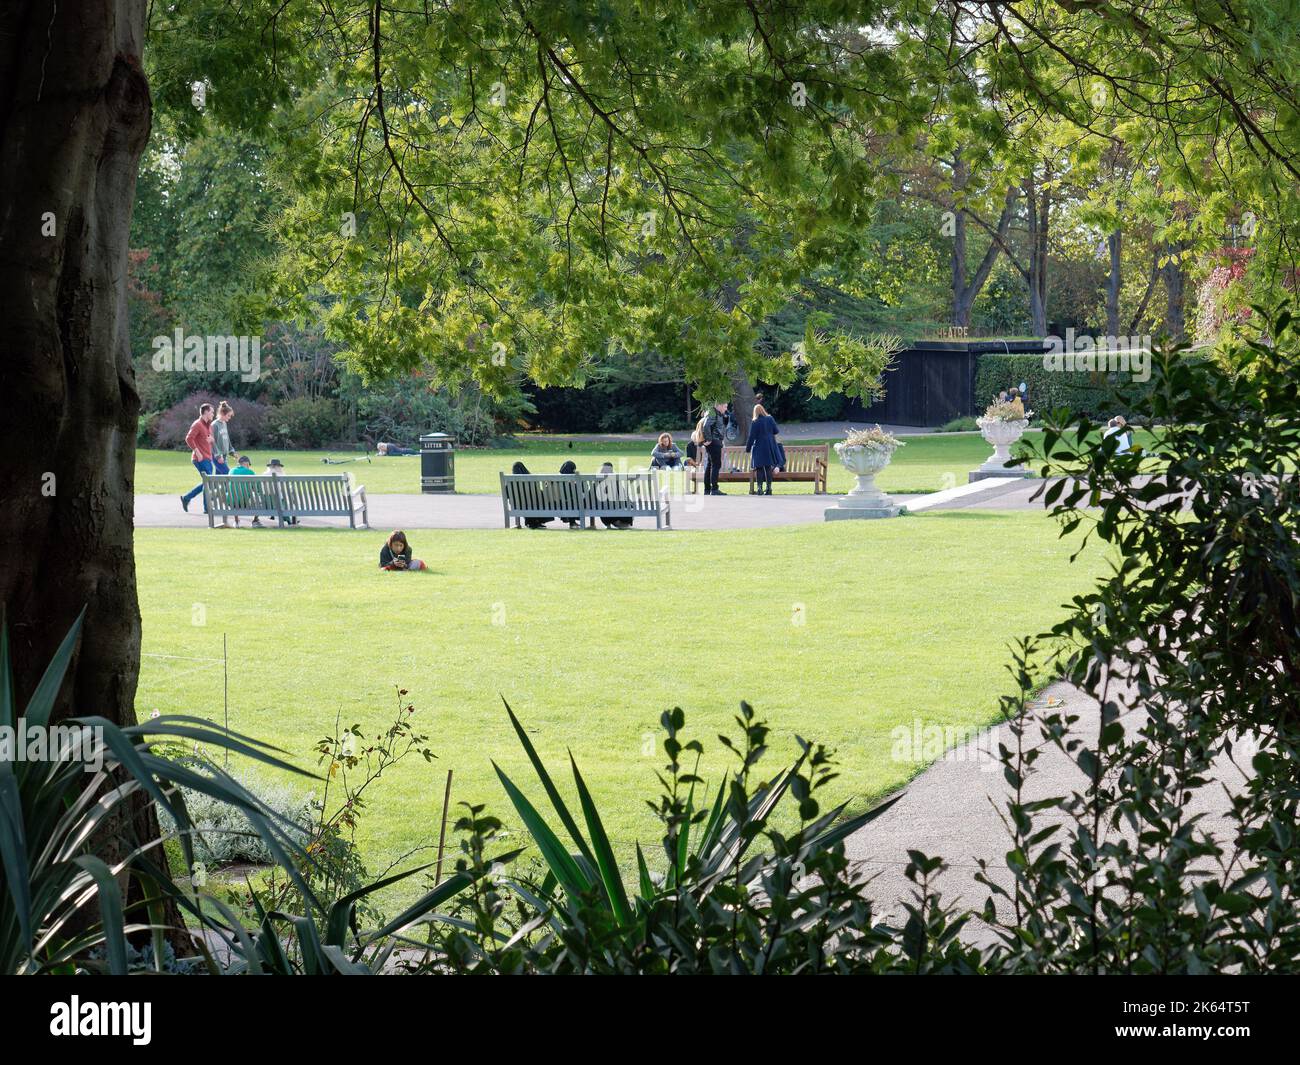 People relaxing in Queen Mary's Gardens within the inner circle of London's Regent's Park Stock Photo